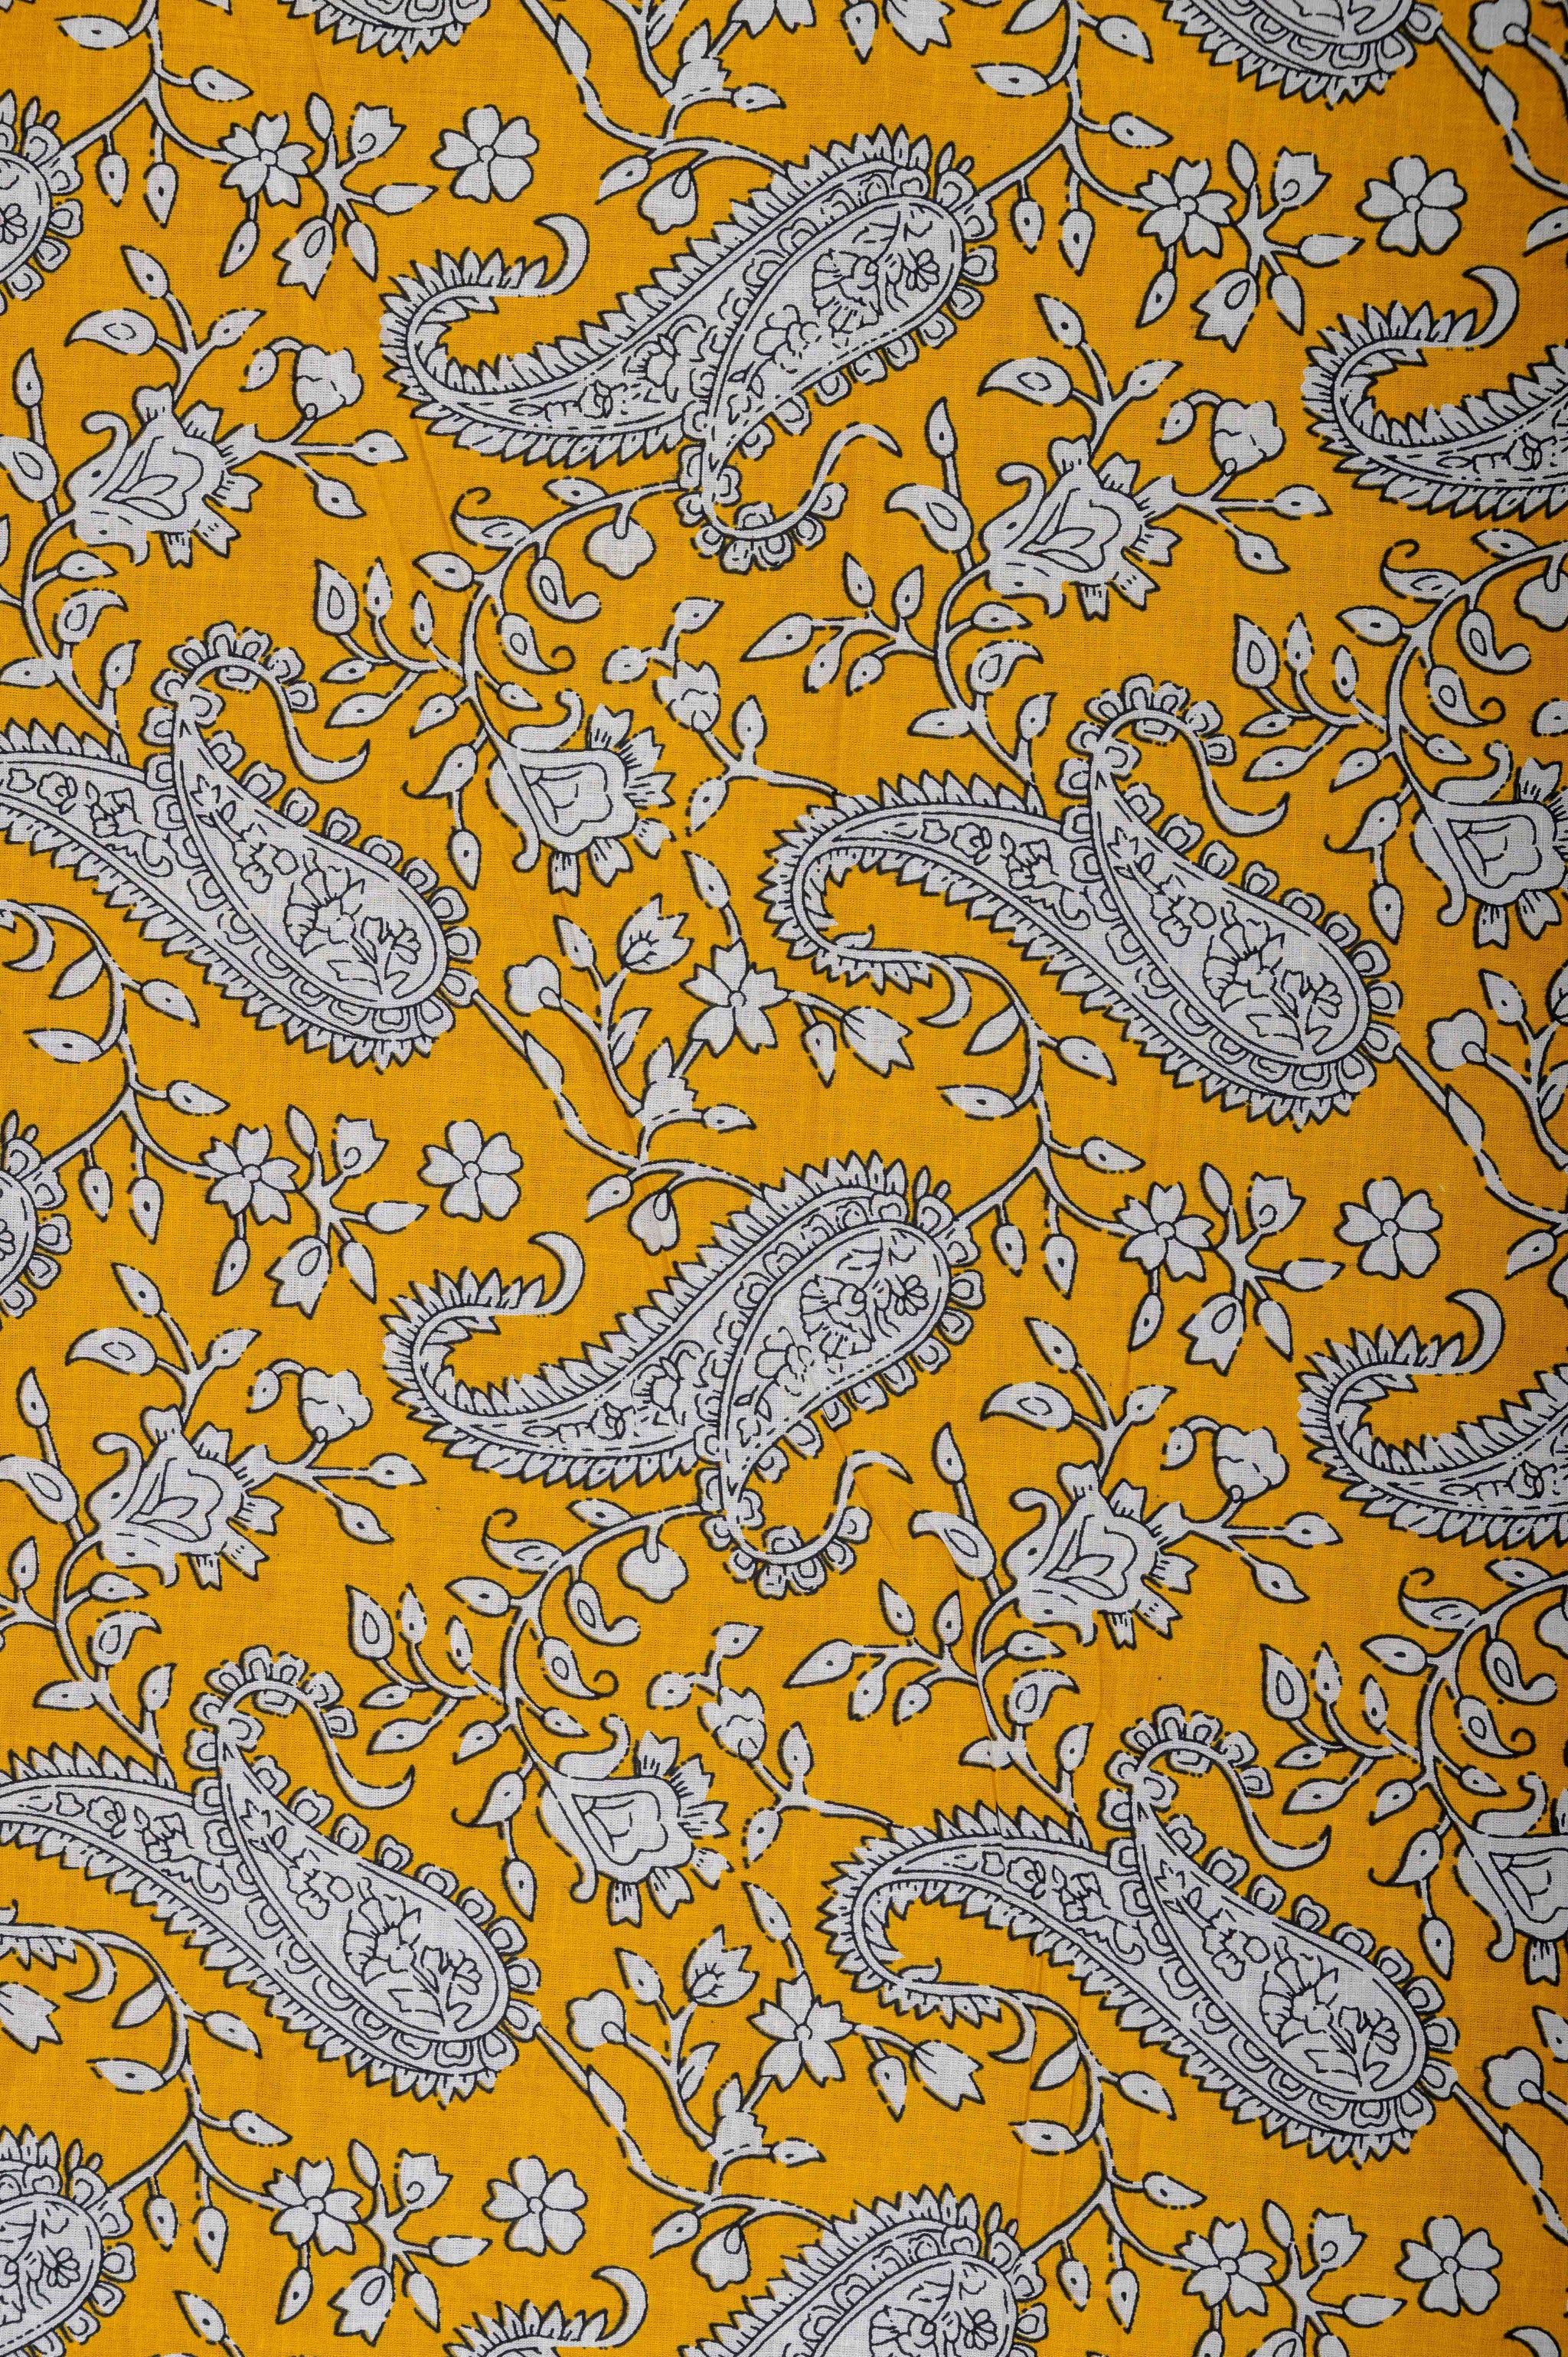 Yellow and White Small Width Cotton Fabric